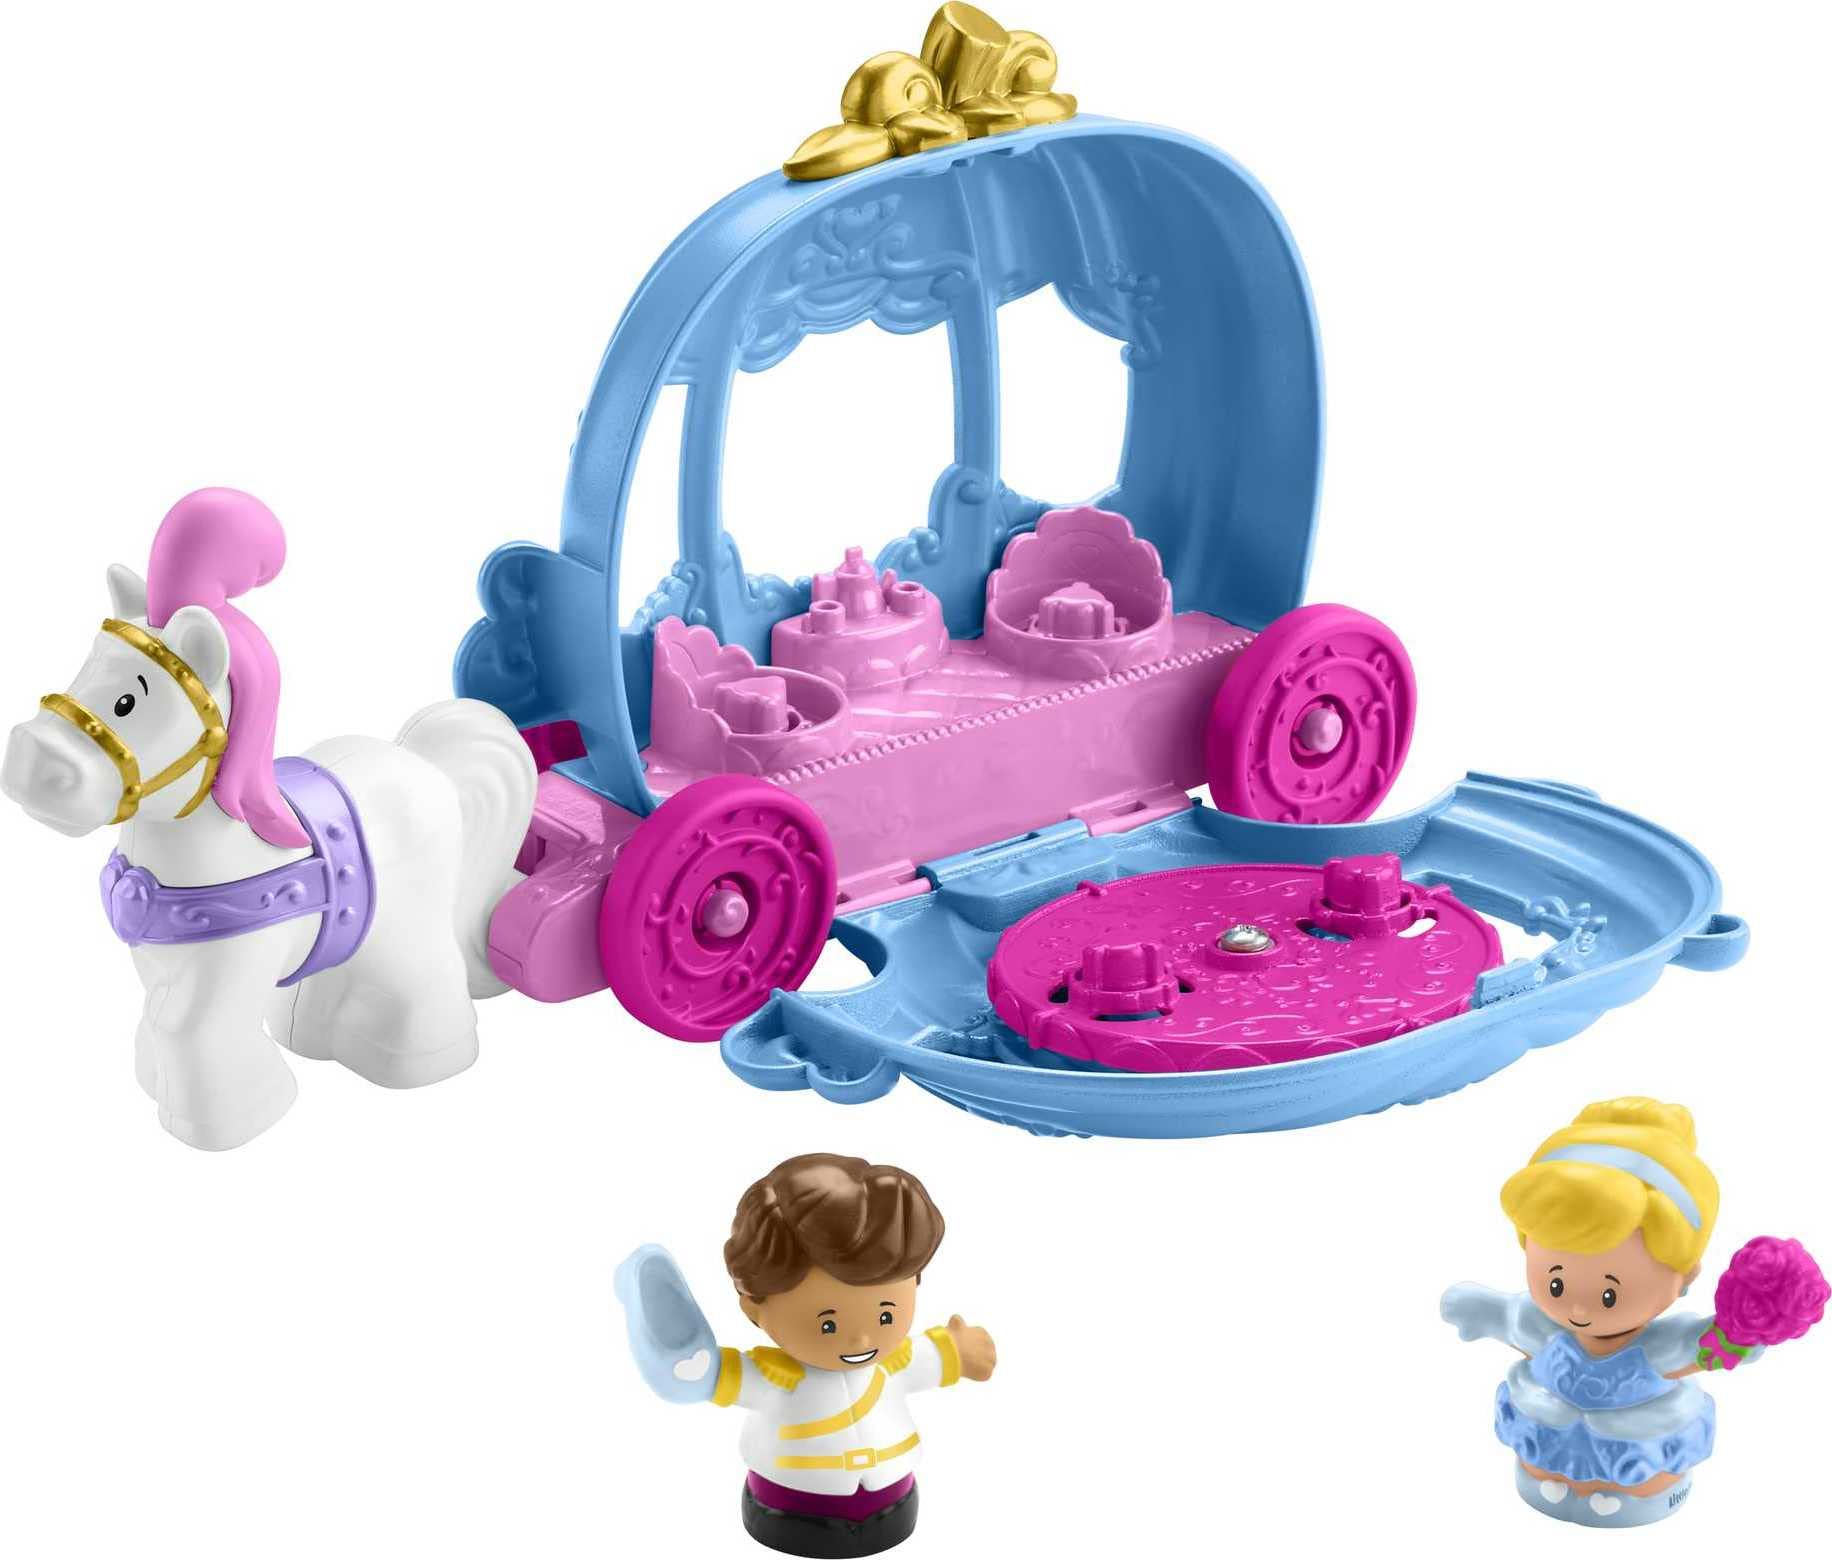 Little People Disney Princess Cinderella's Dancing Carriage Vehicle Playset w/ Horses & Figures $11 + Free Shipping w/ Prime or on $35+